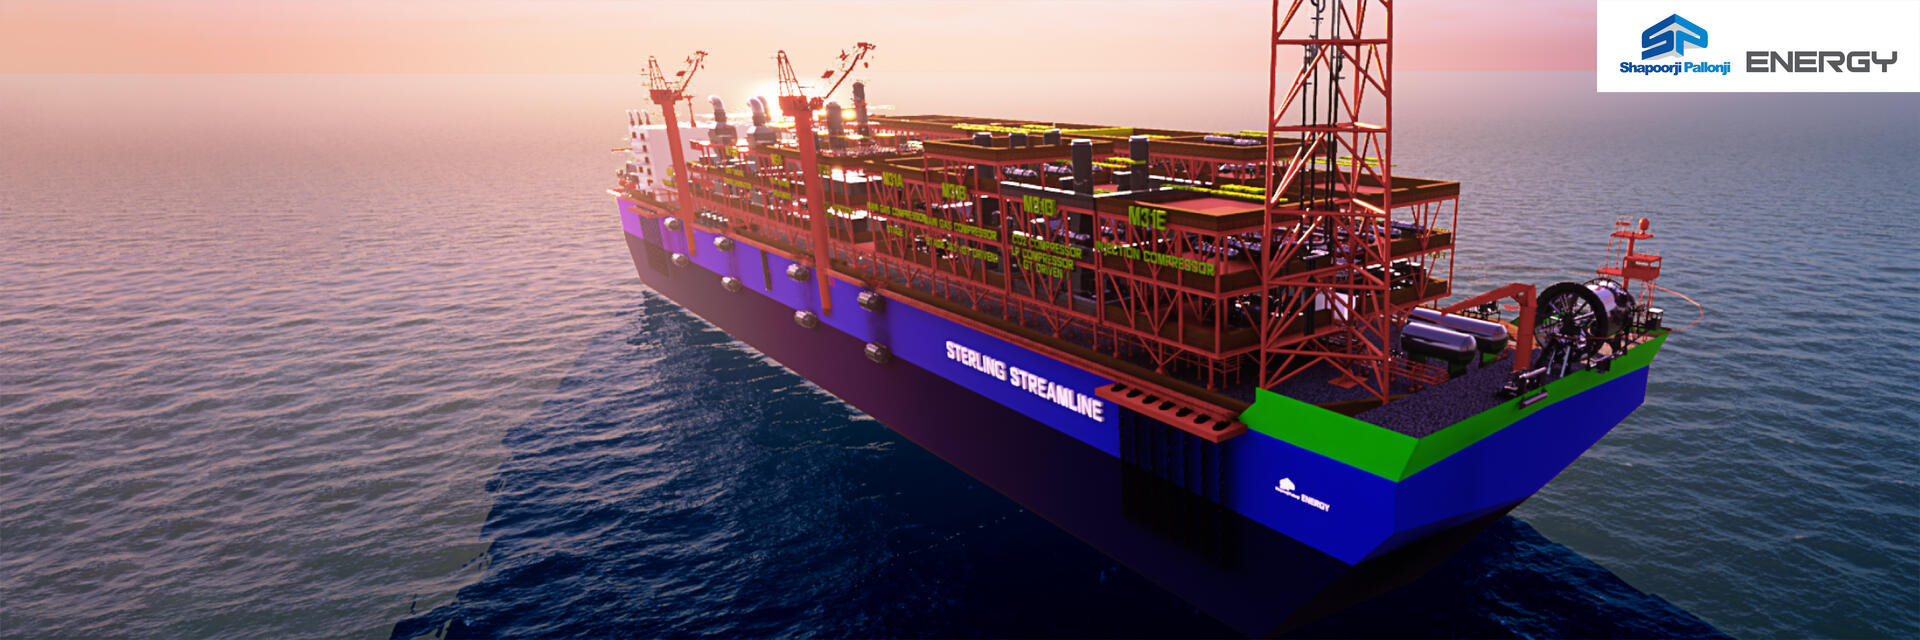 Shapoorji Pallonji Energy Unveils Next-Gen FPSO Hull with FEED Level AIP from ABS